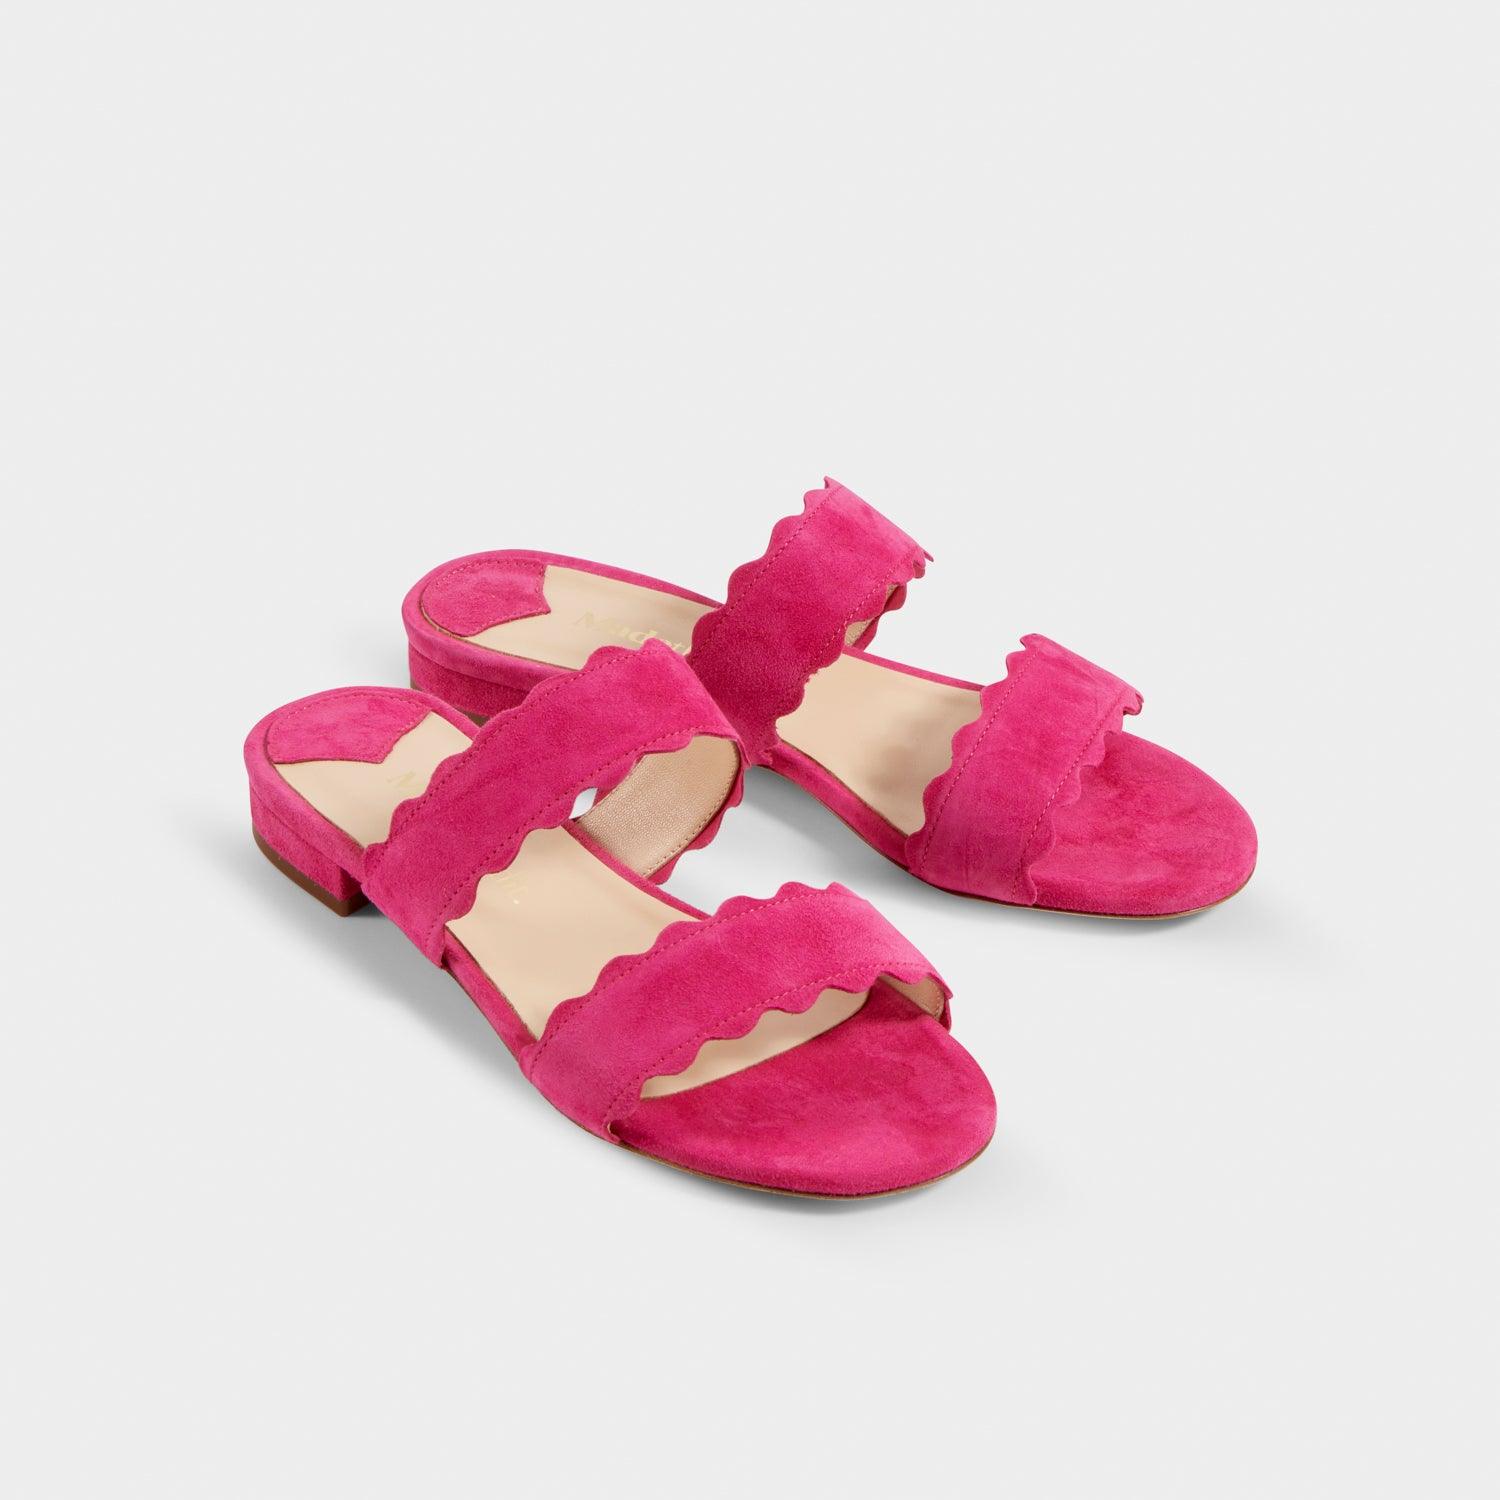 Naomi Pink Suede Scallop Sandal - MADE THE EDIT